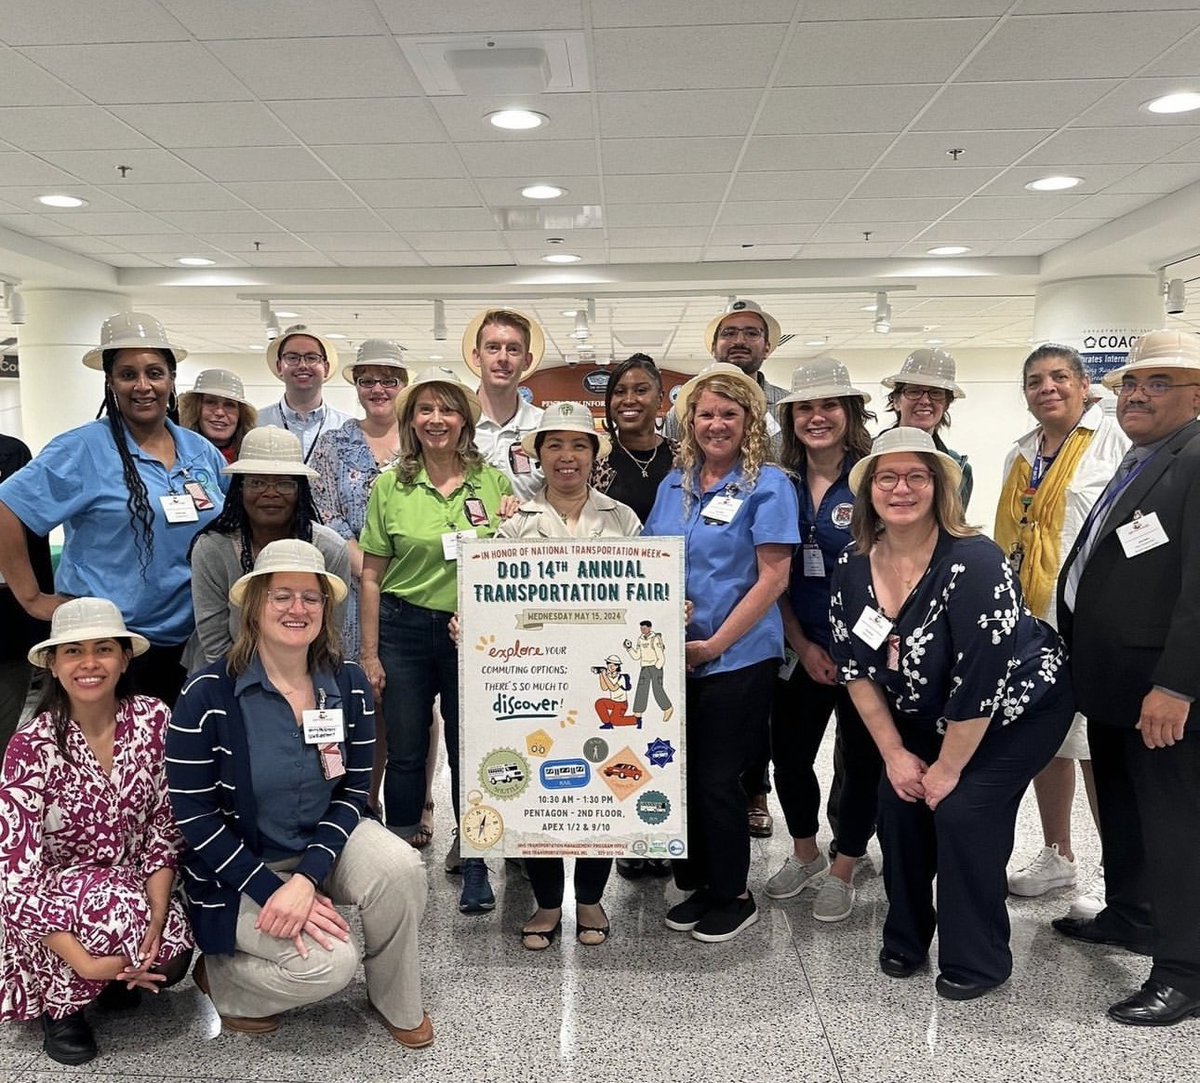 #DASHvisits the Pentagon with WHS Transportation! 🚌 In honor of National Transportation Week, the @deptofdefense hosted their 14th Annual Transportation Fair! The fair gives the audience the opportunity to learn more about the different commuting options!🚲🚊🚗🚶‍♂️🚌